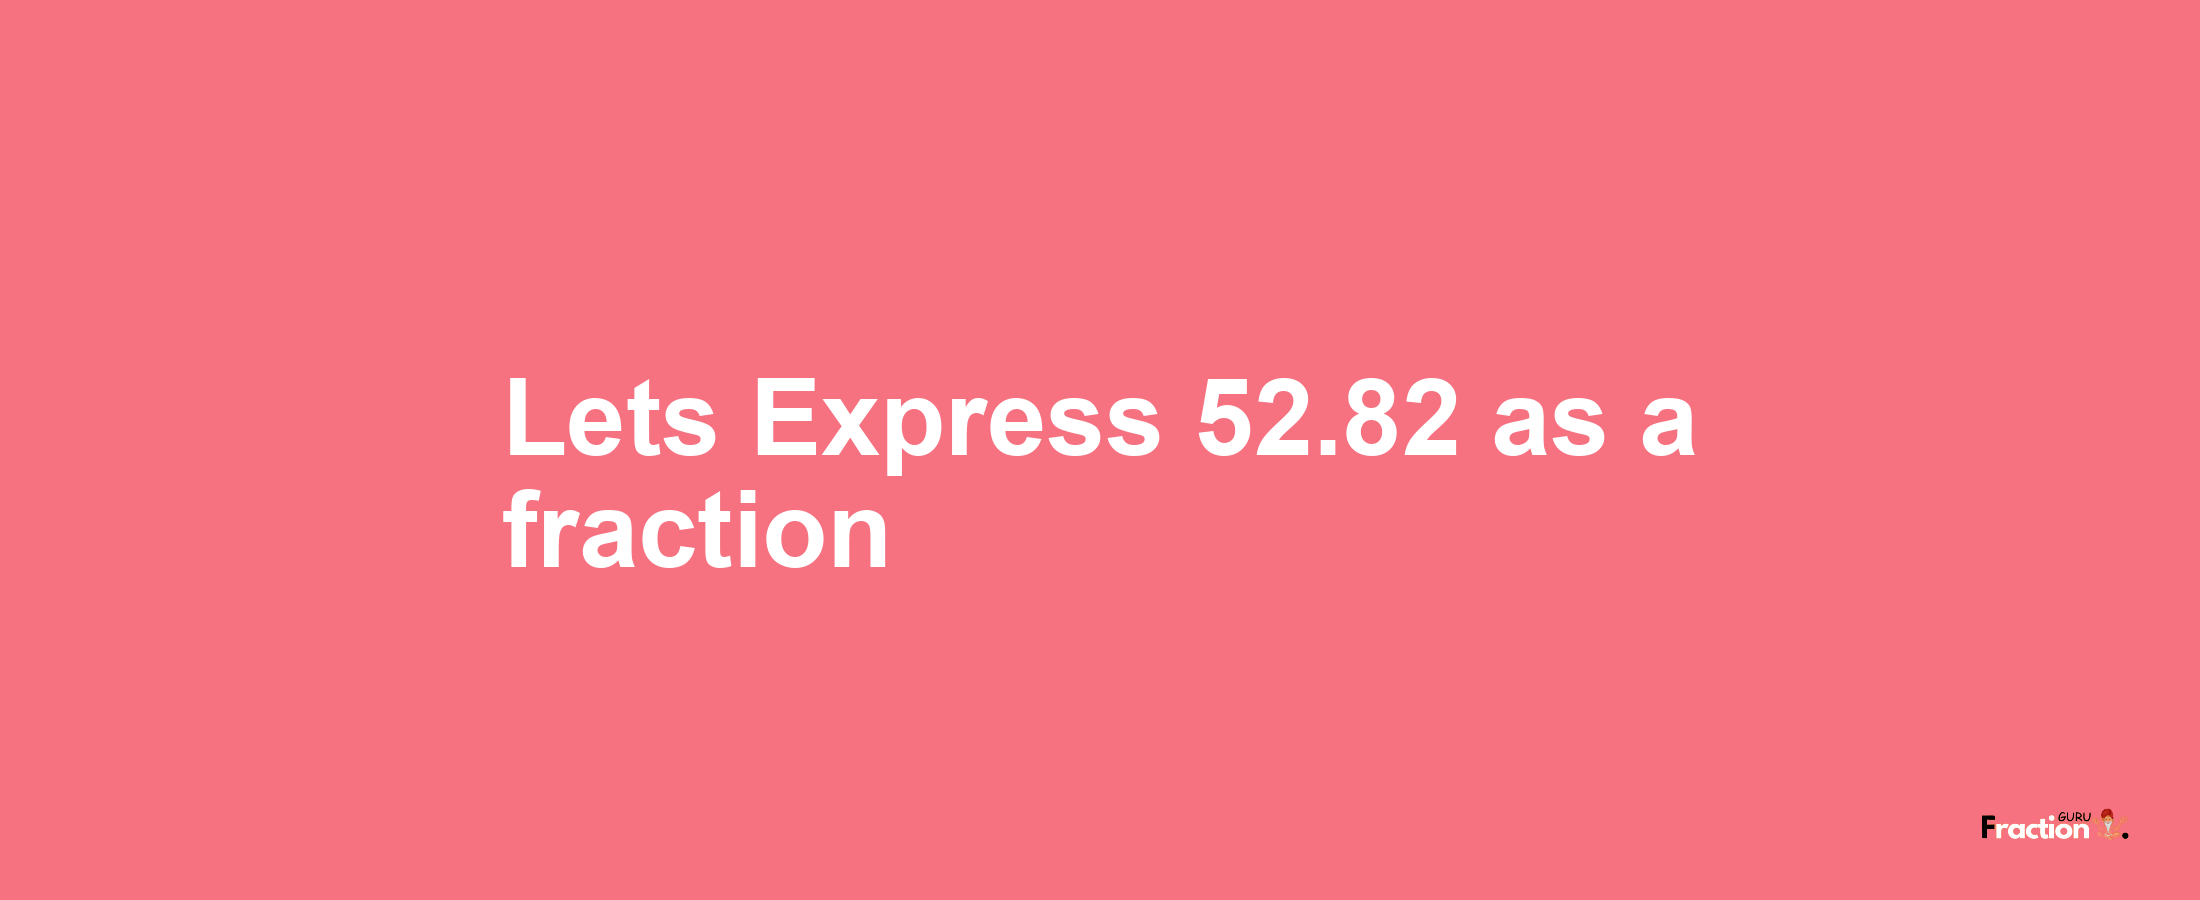 Lets Express 52.82 as afraction